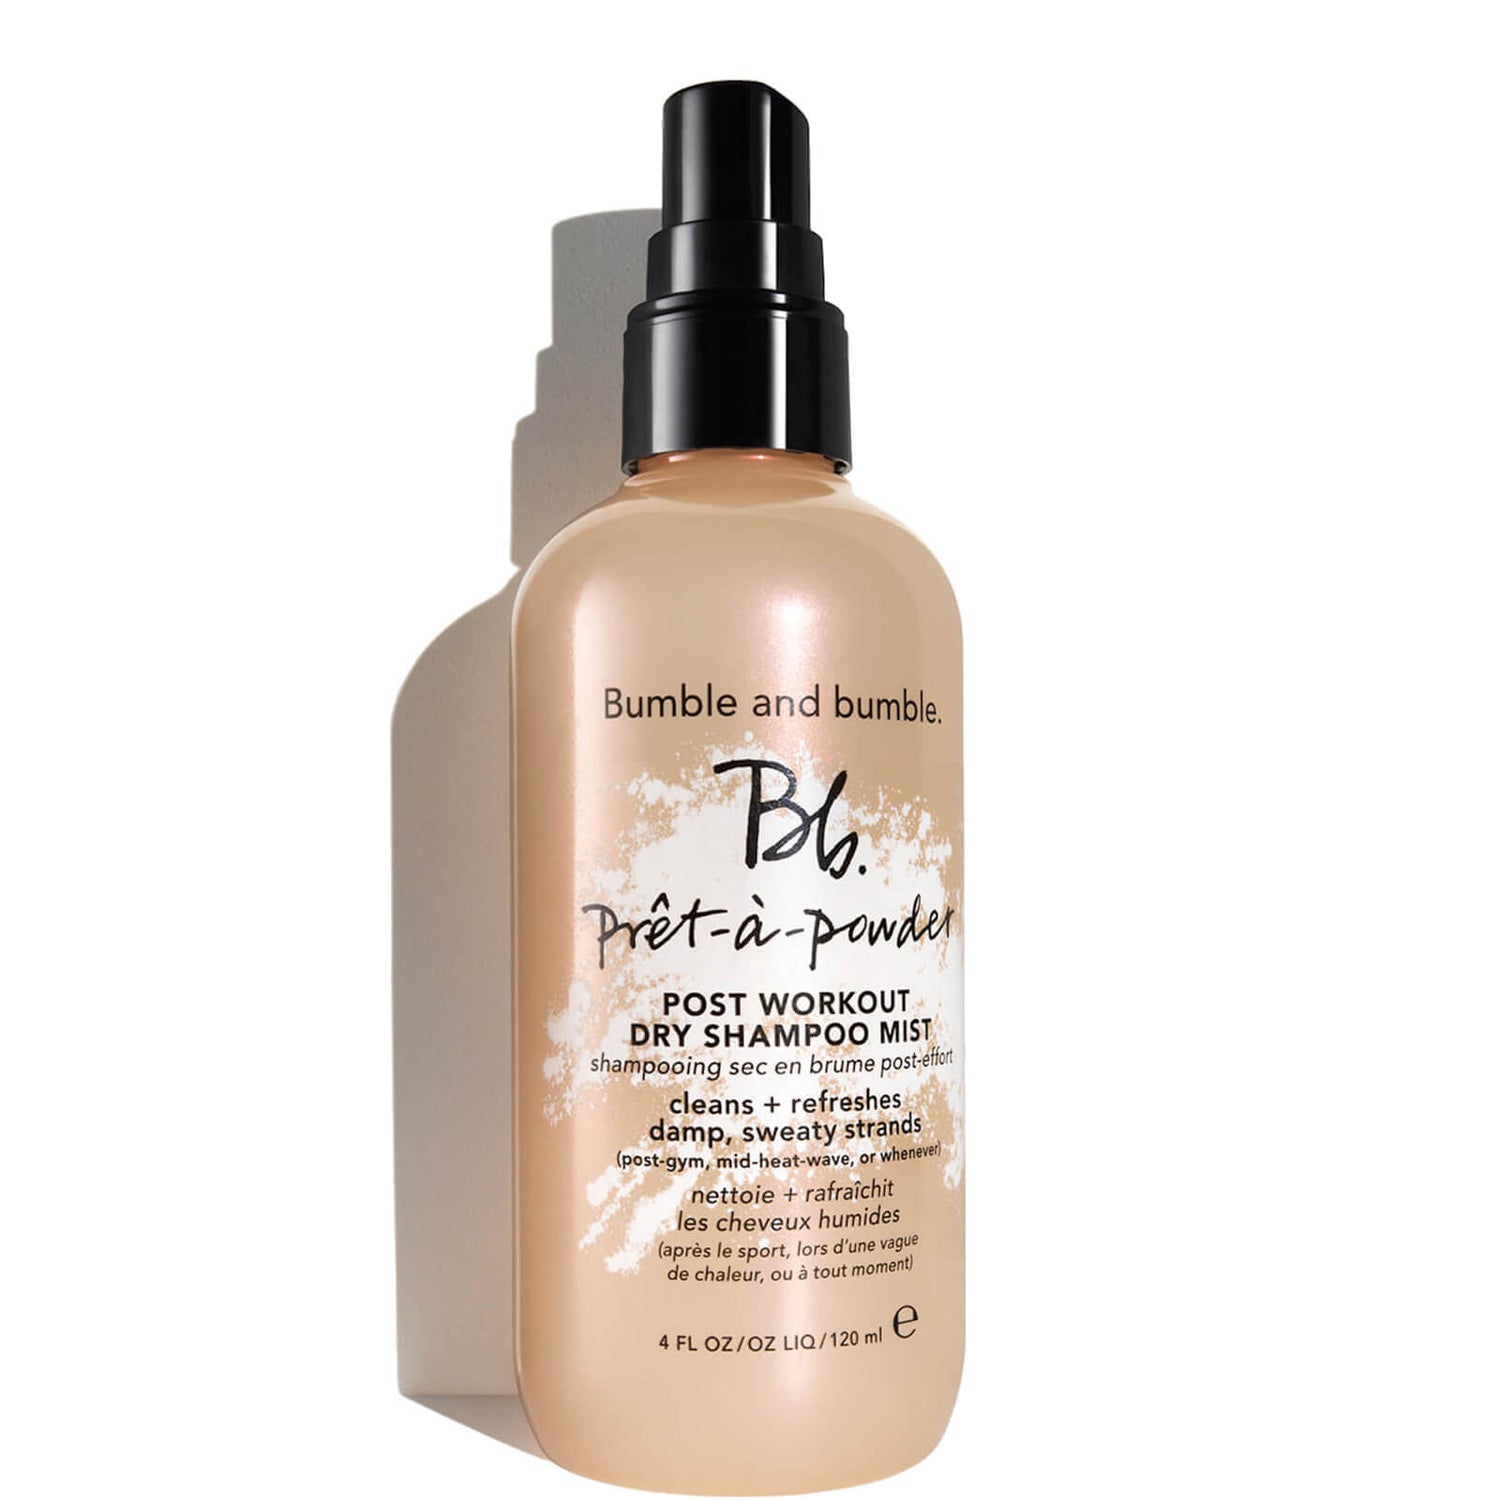 Bumble and bumble Pret-a-Powder Active Dry Spray 120ml